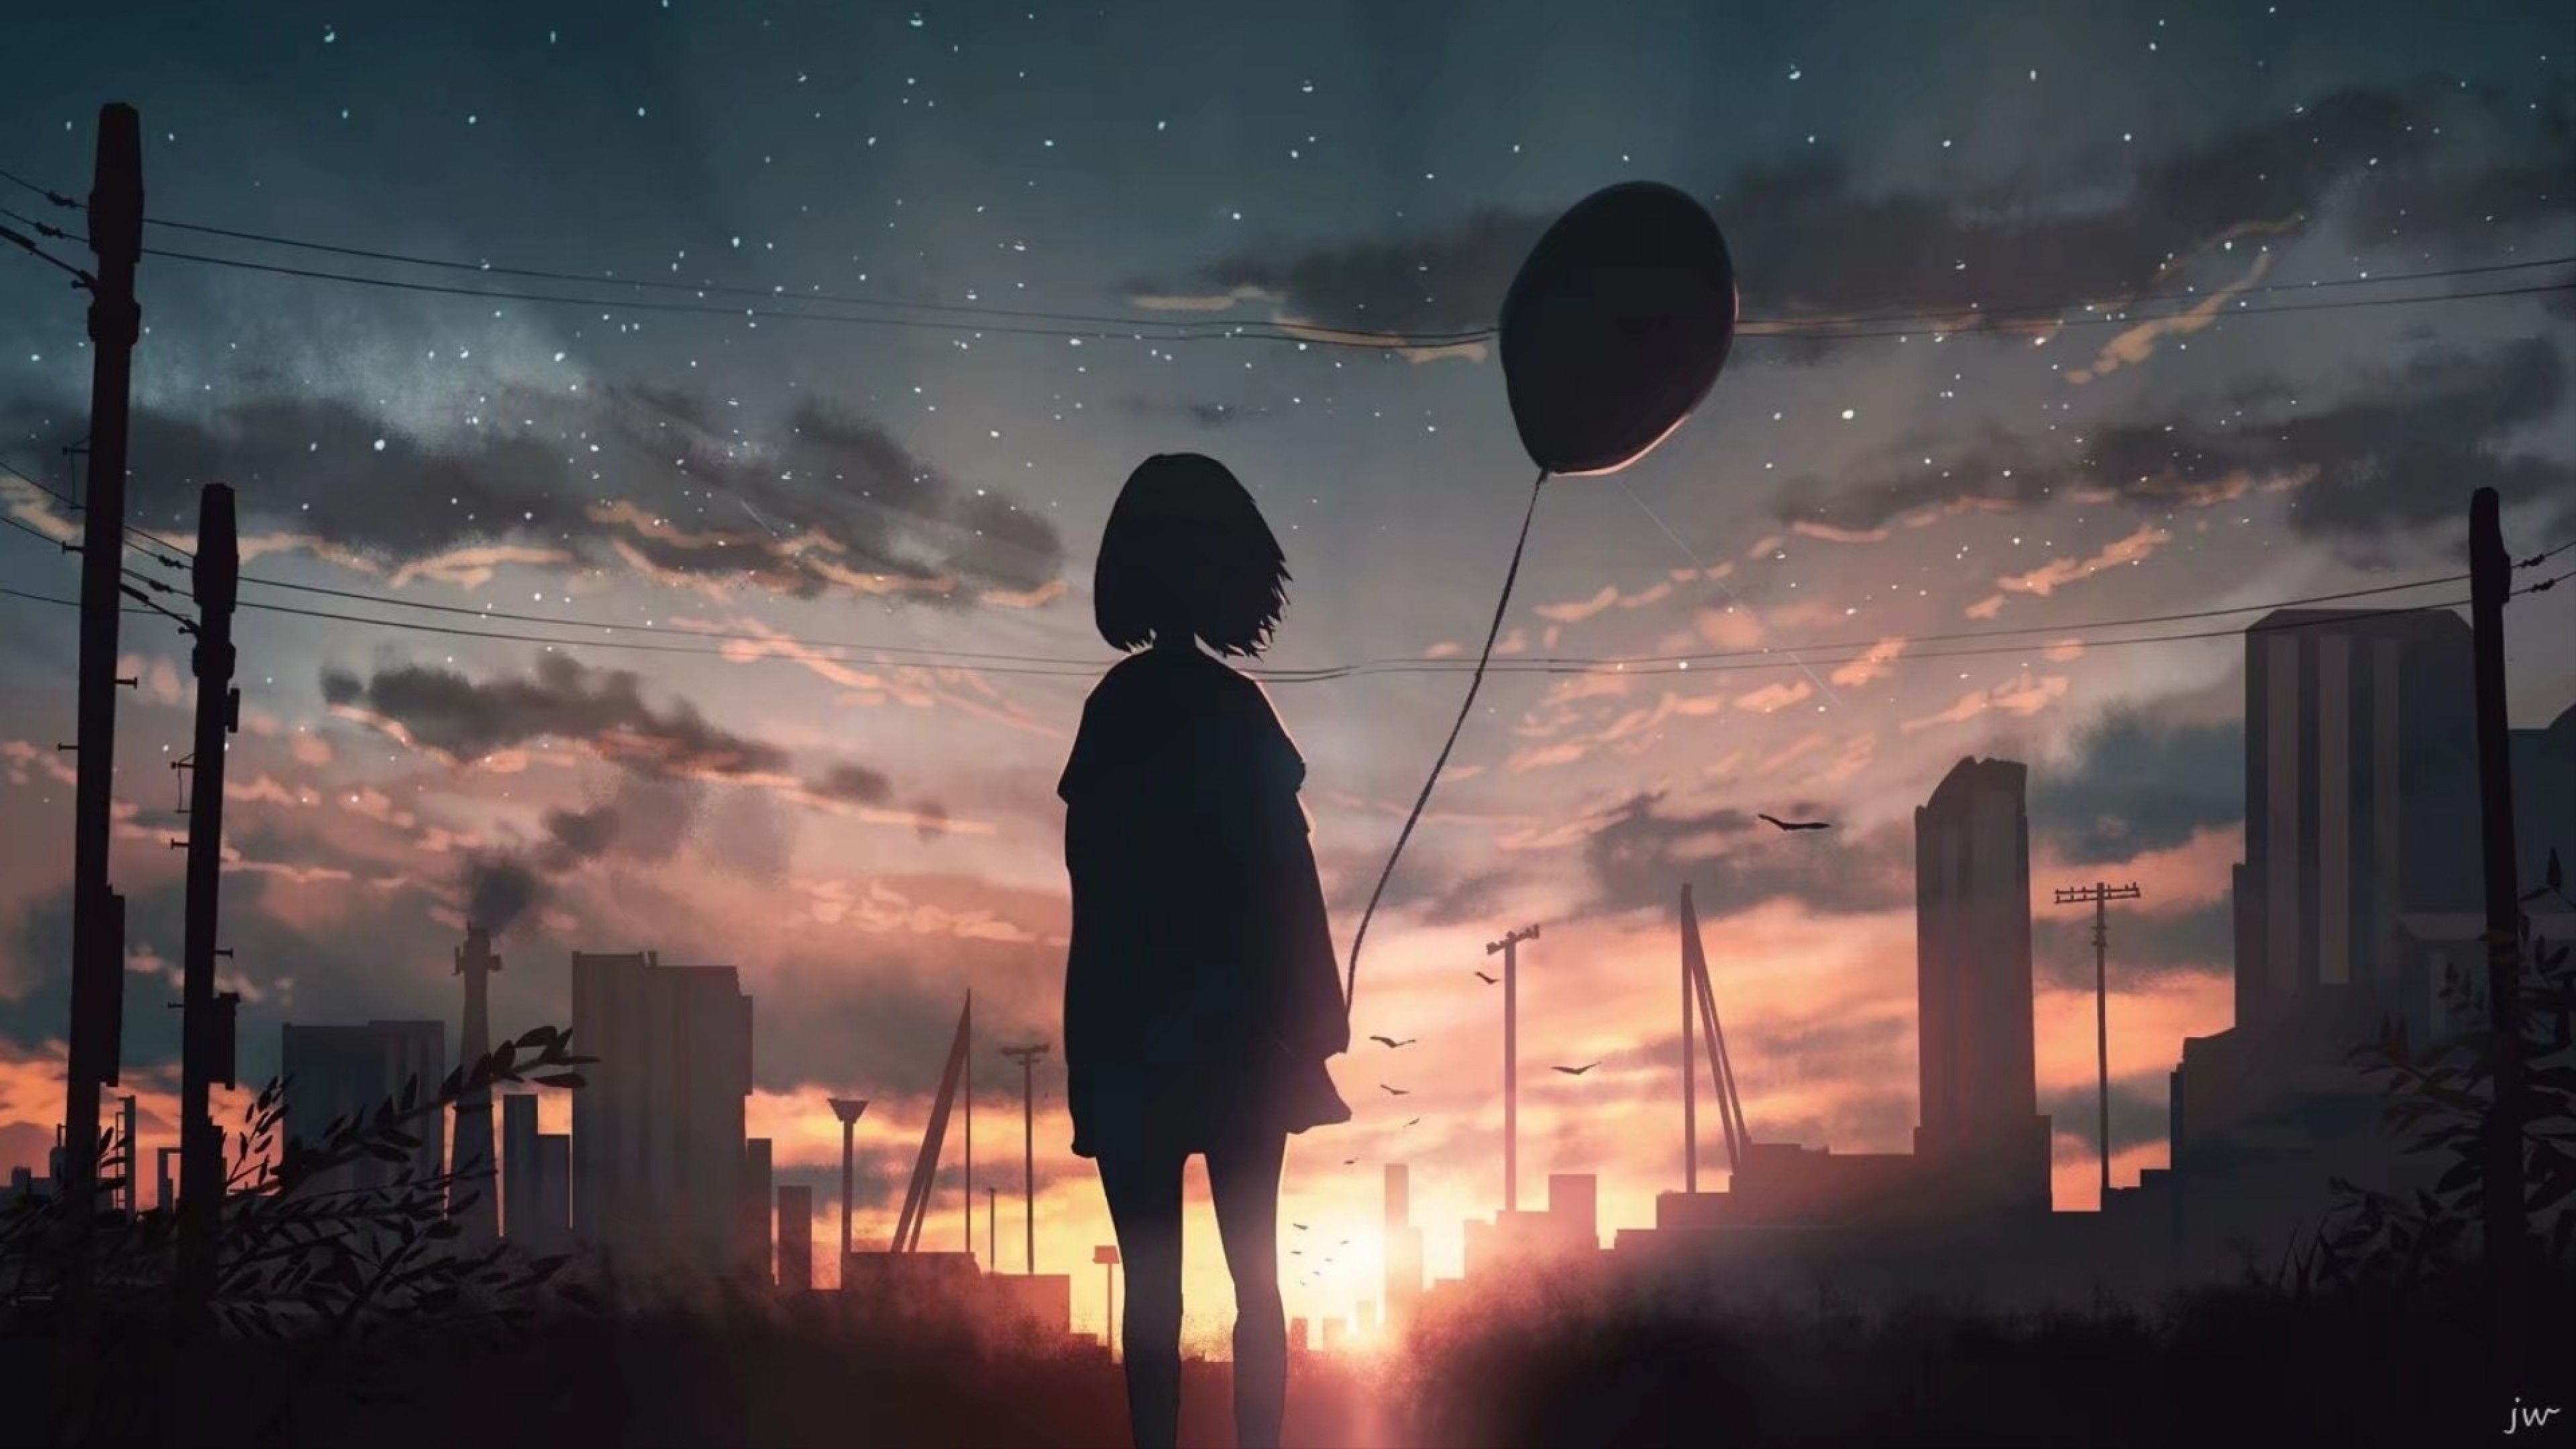 A girl holding balloons in the city - Sunset